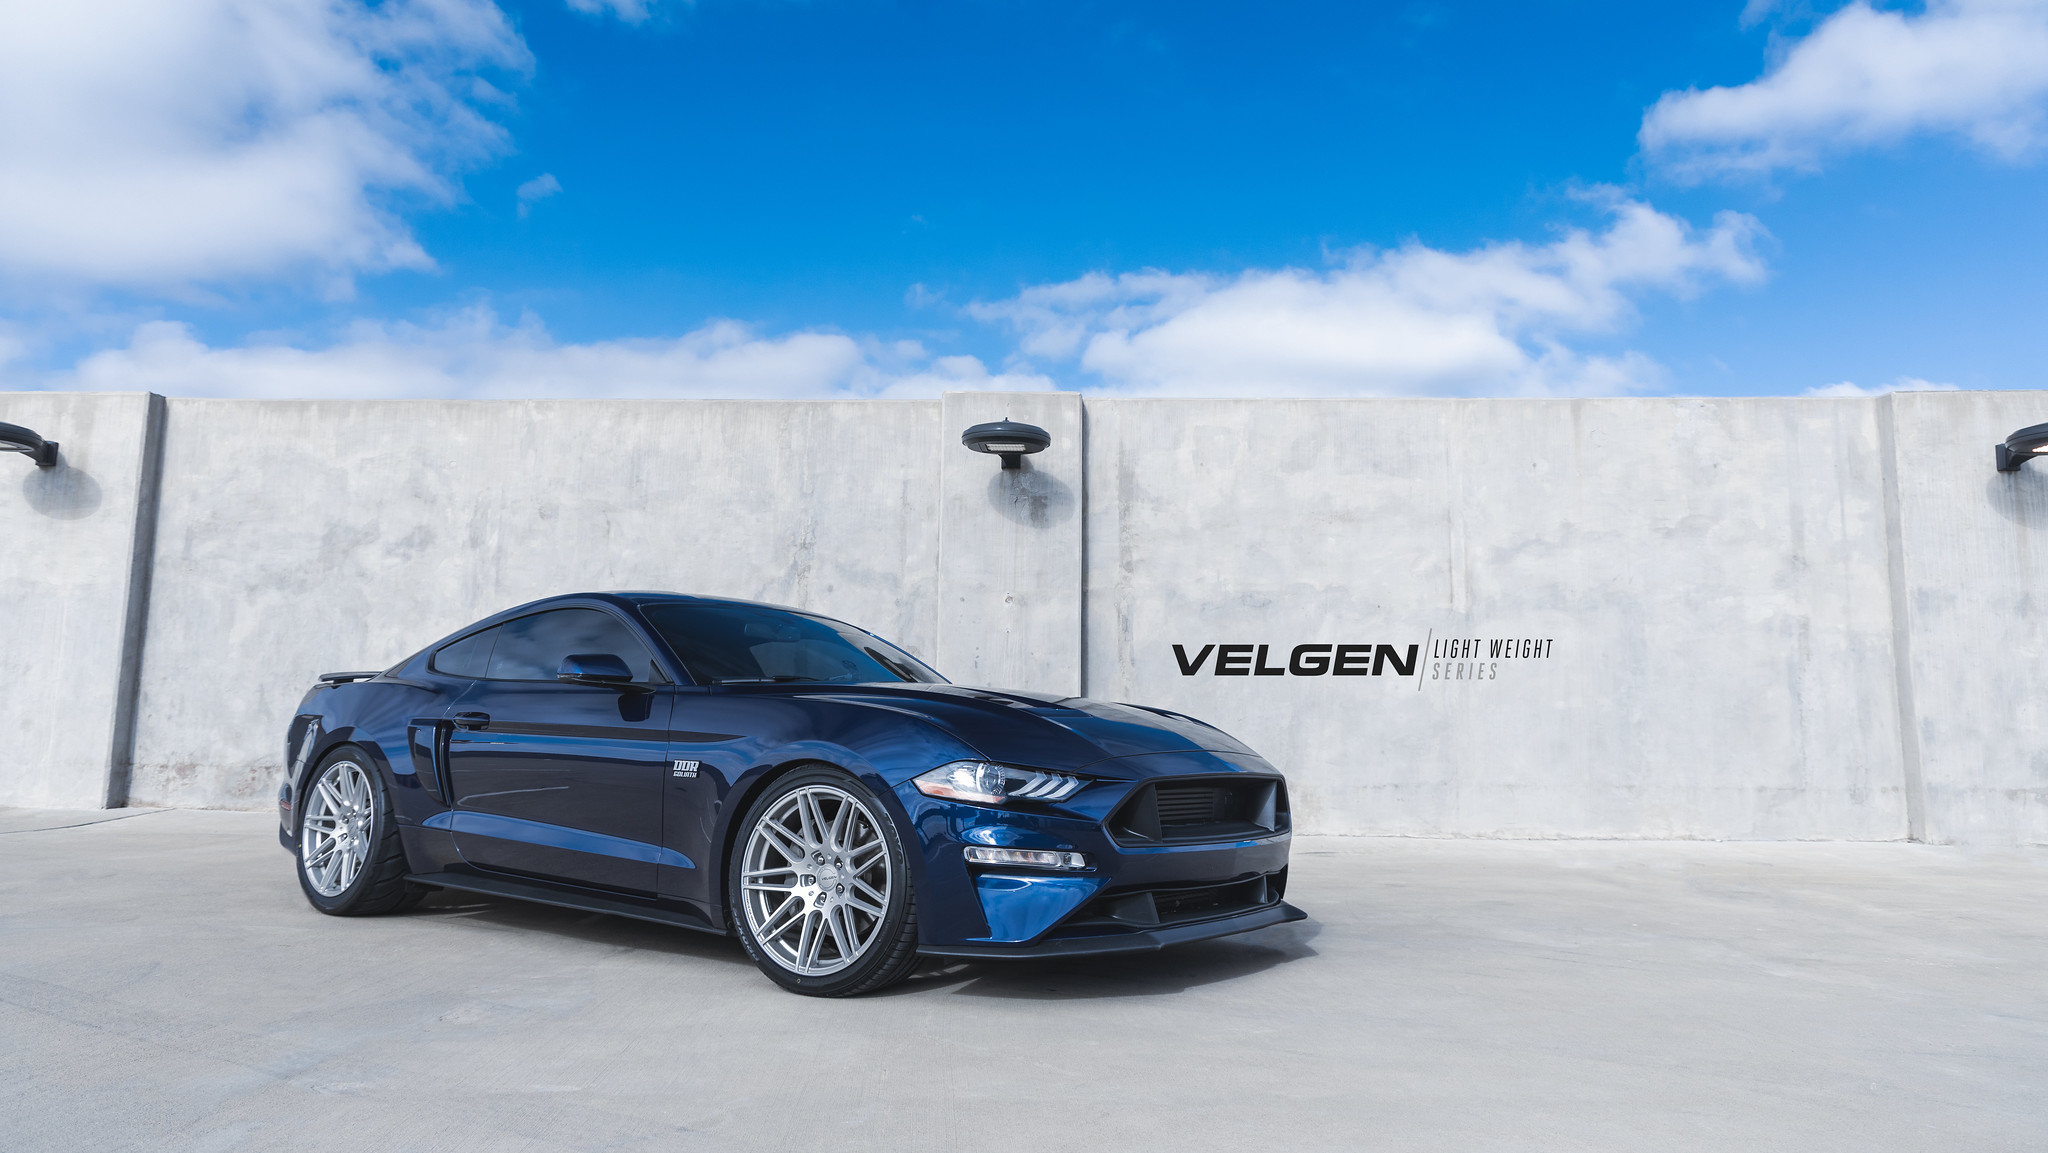 S650 Mustang 19" 20" Velgen Flow Forged Concave Wheels Mustang S650 - Vibe Motorsports Official Thread 50863062563_ad1c4b7f41_k